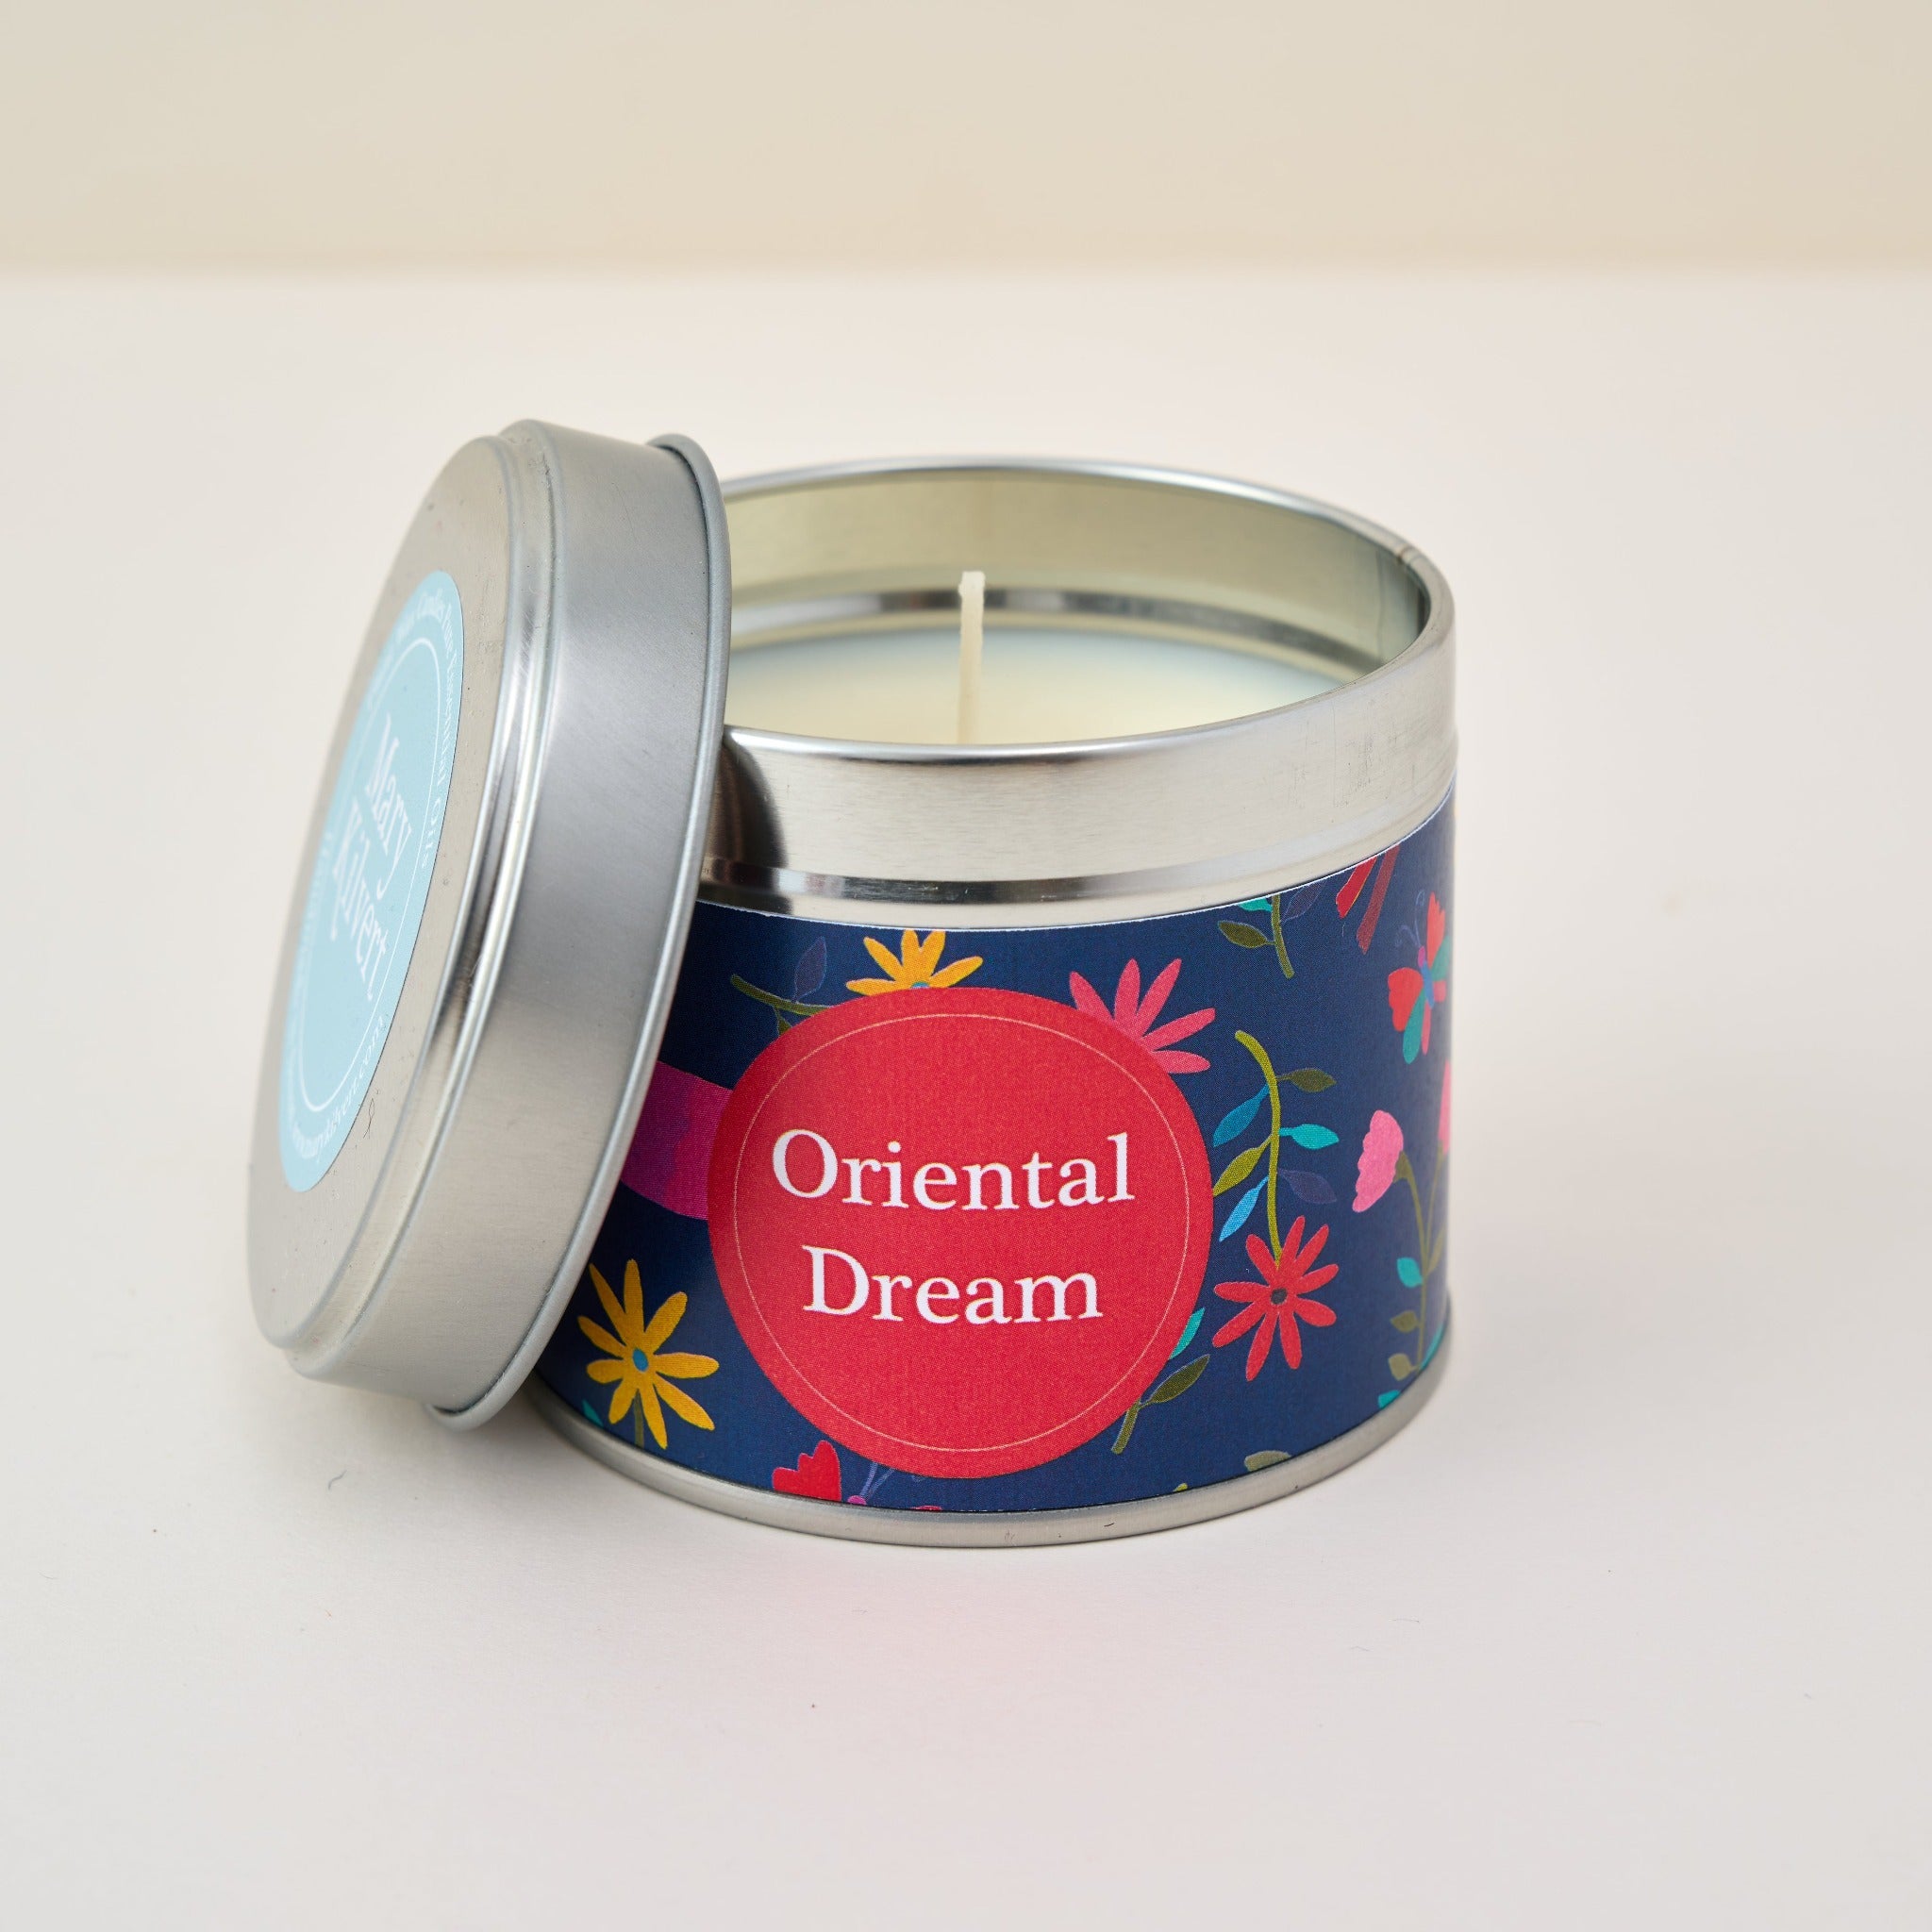 Oriental Dream Candle by Mary Kilvert